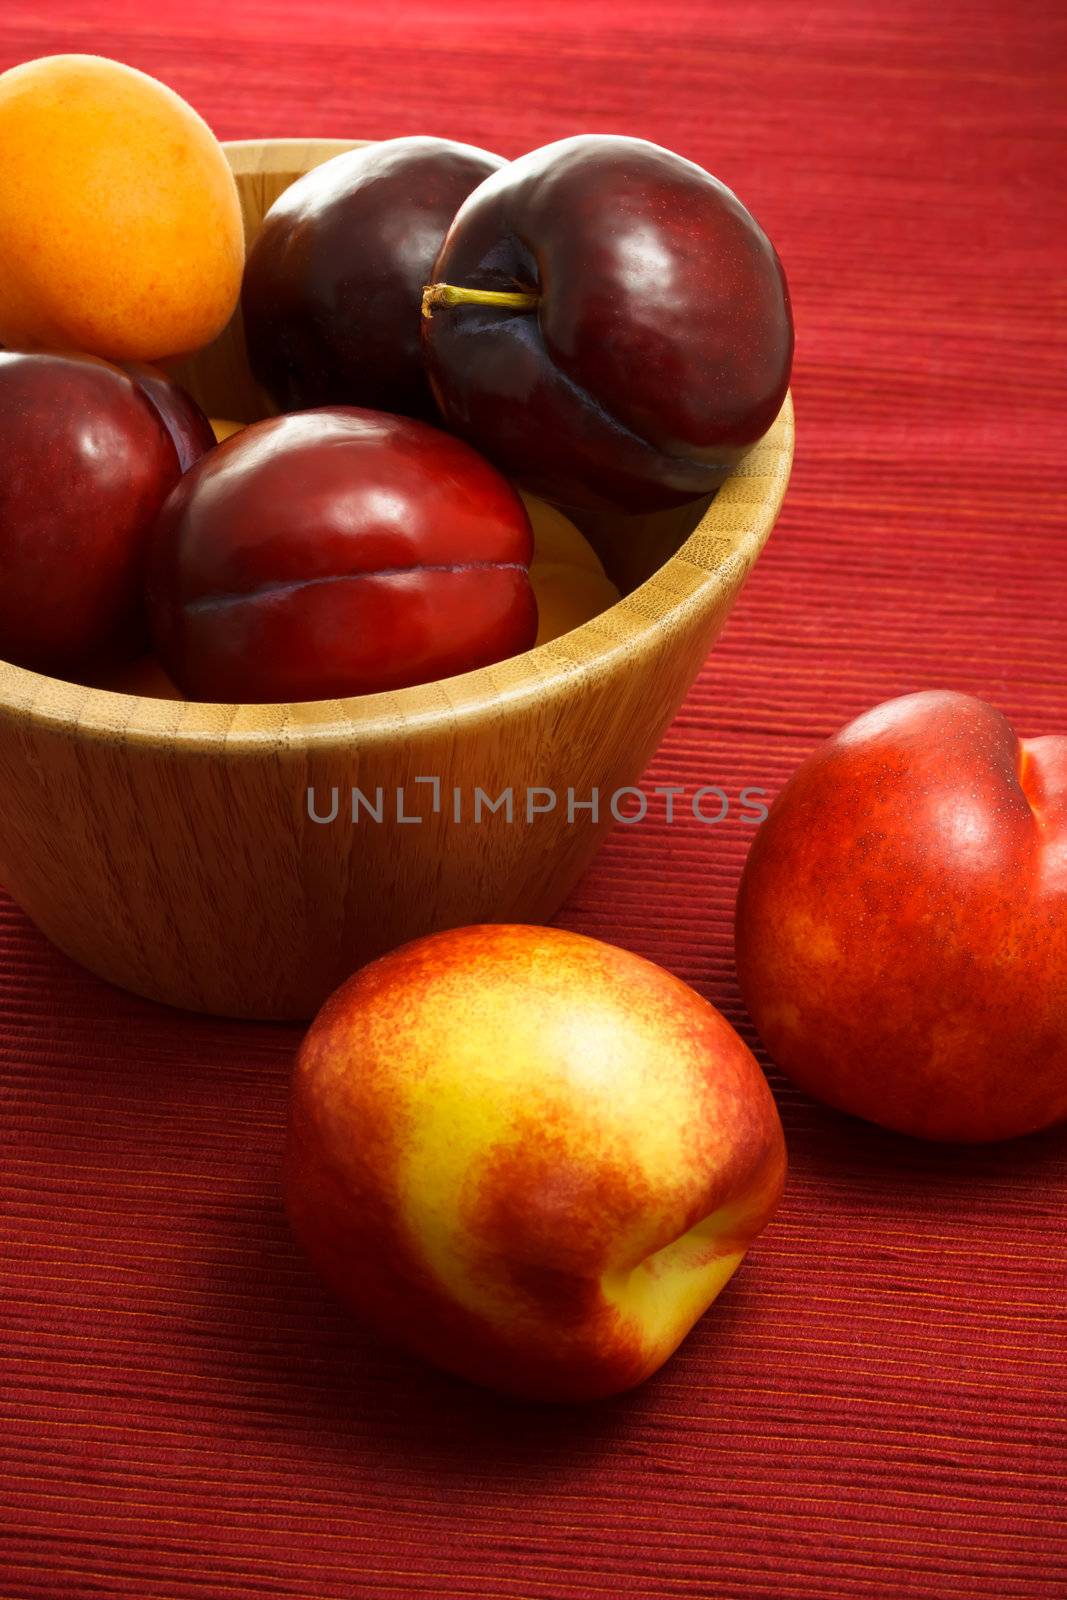 Juicy nectarines, plums and apricot by melpomene